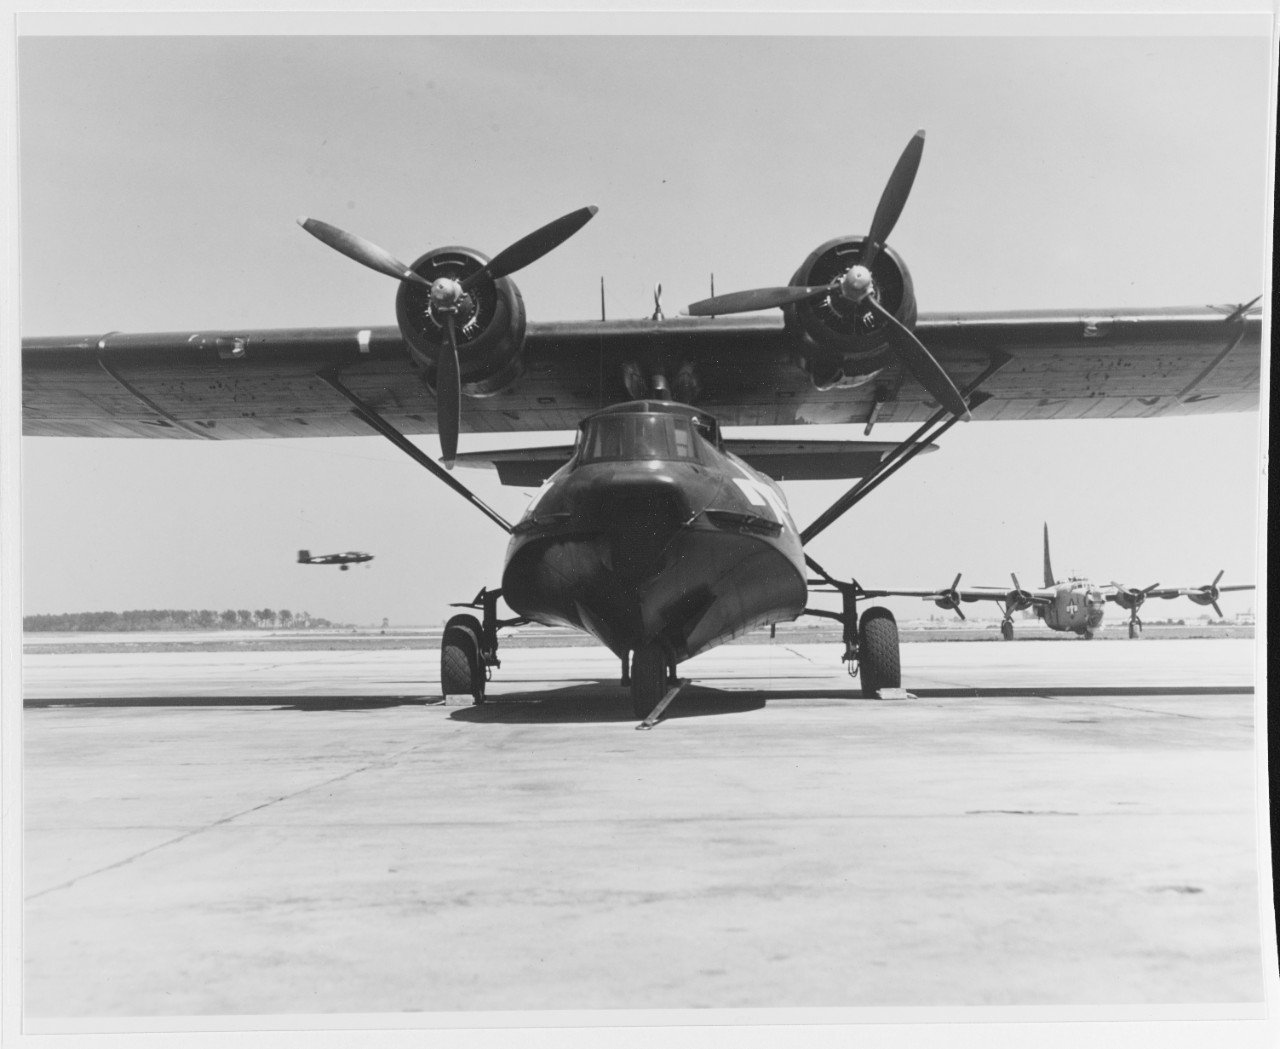 Consolidated PBY-5A Catalina Patrol Bomber